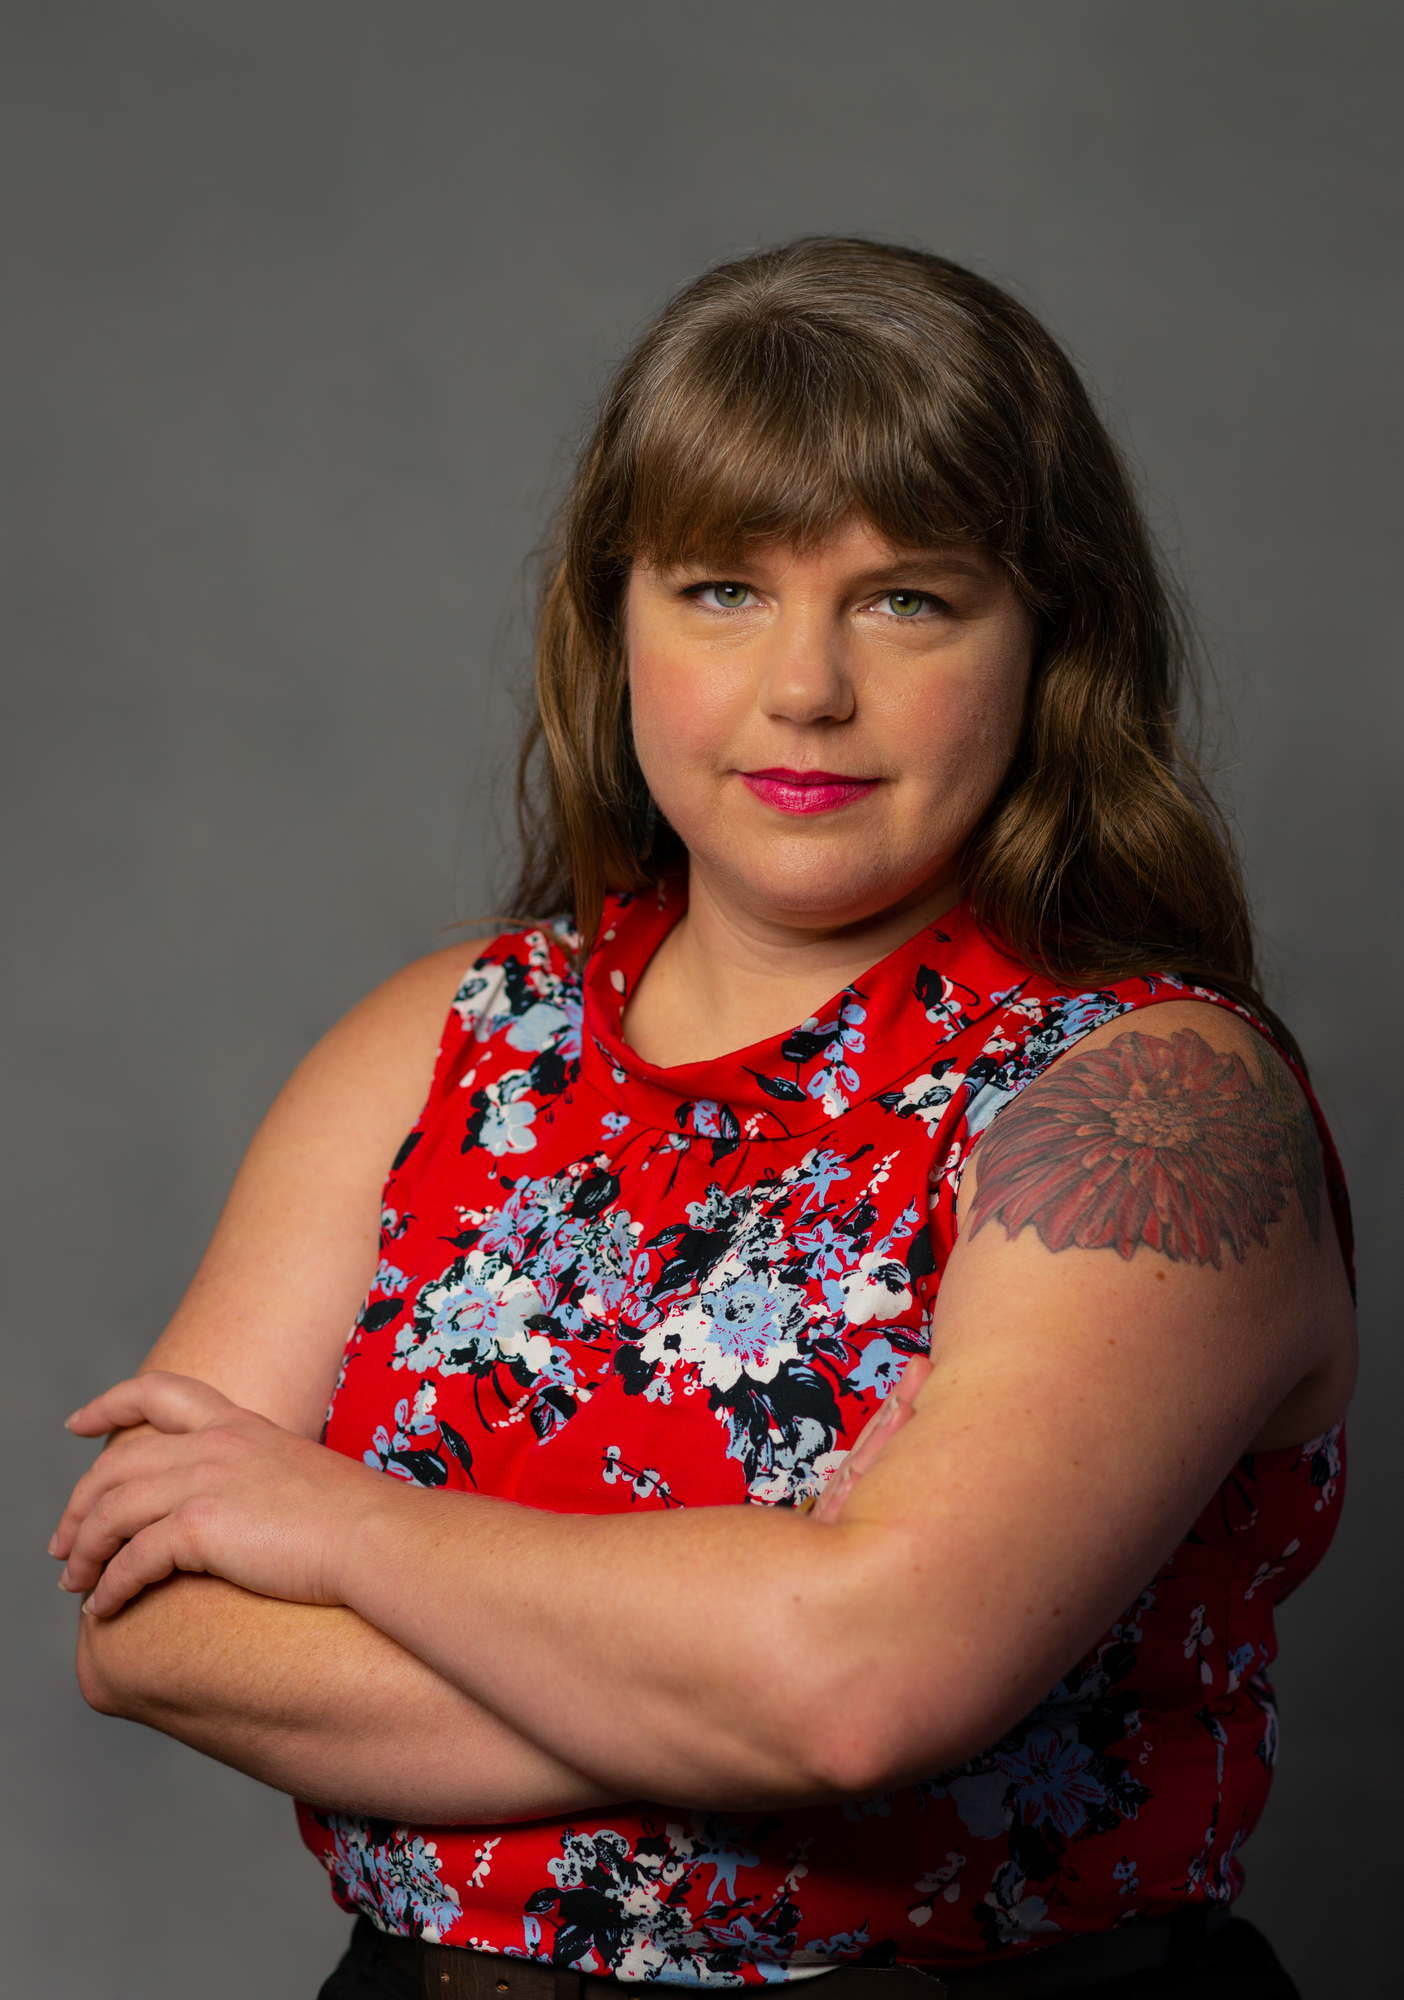  A fat woman looks confidently at the camera during a business headshot session in the PNW